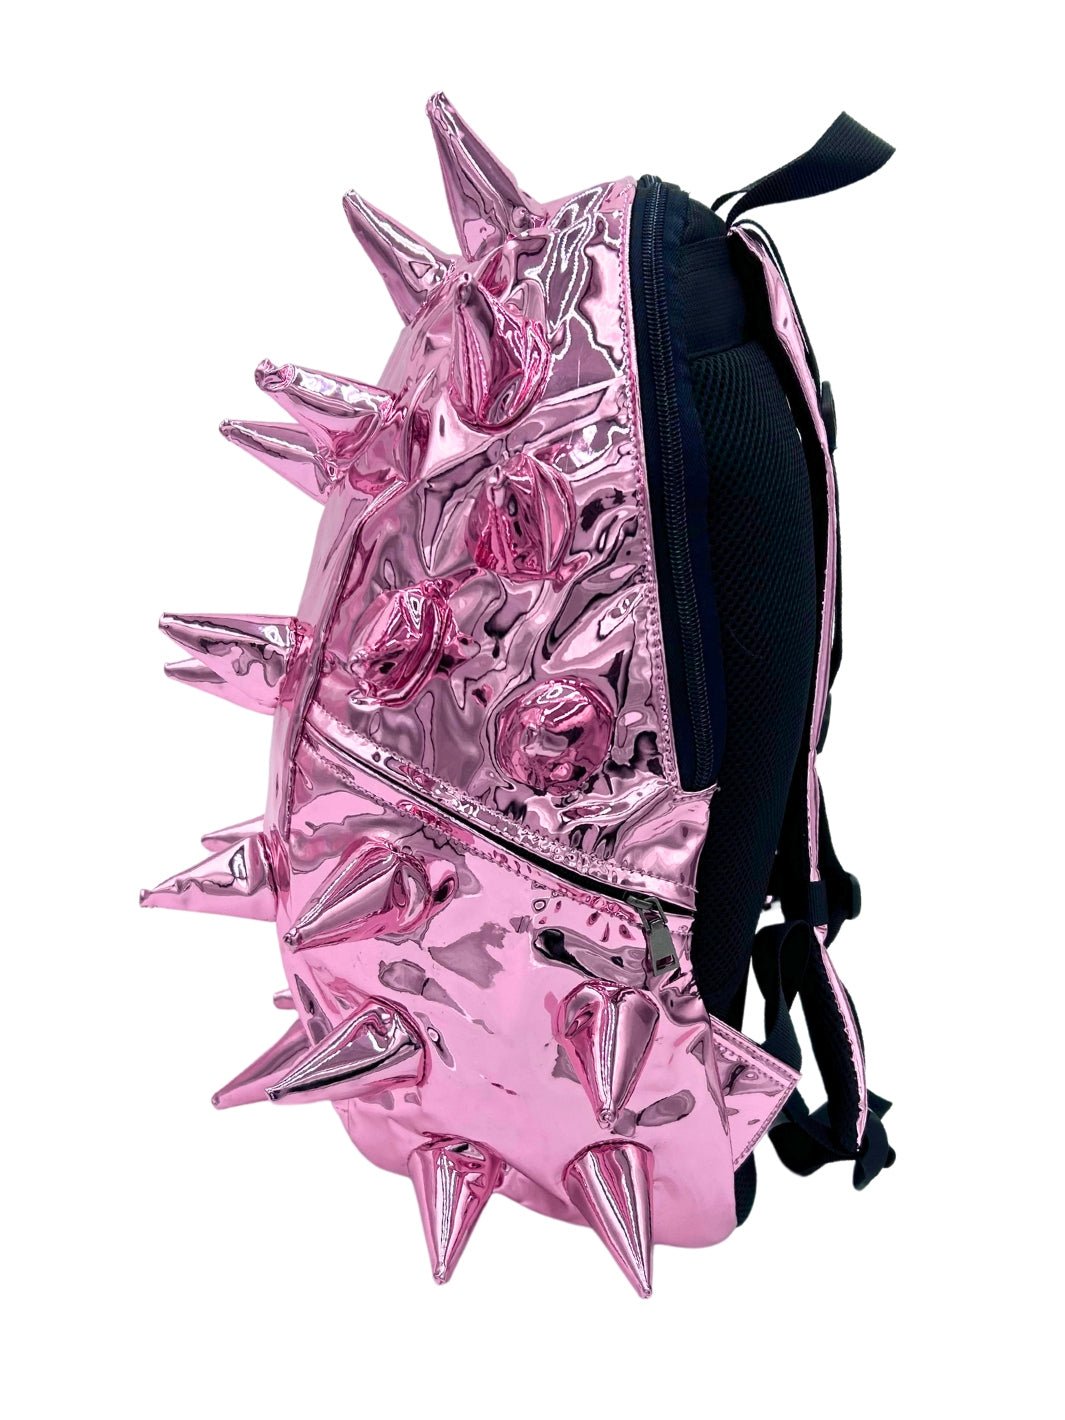 Side view of metallic pink bookbag with spikes by Madpax